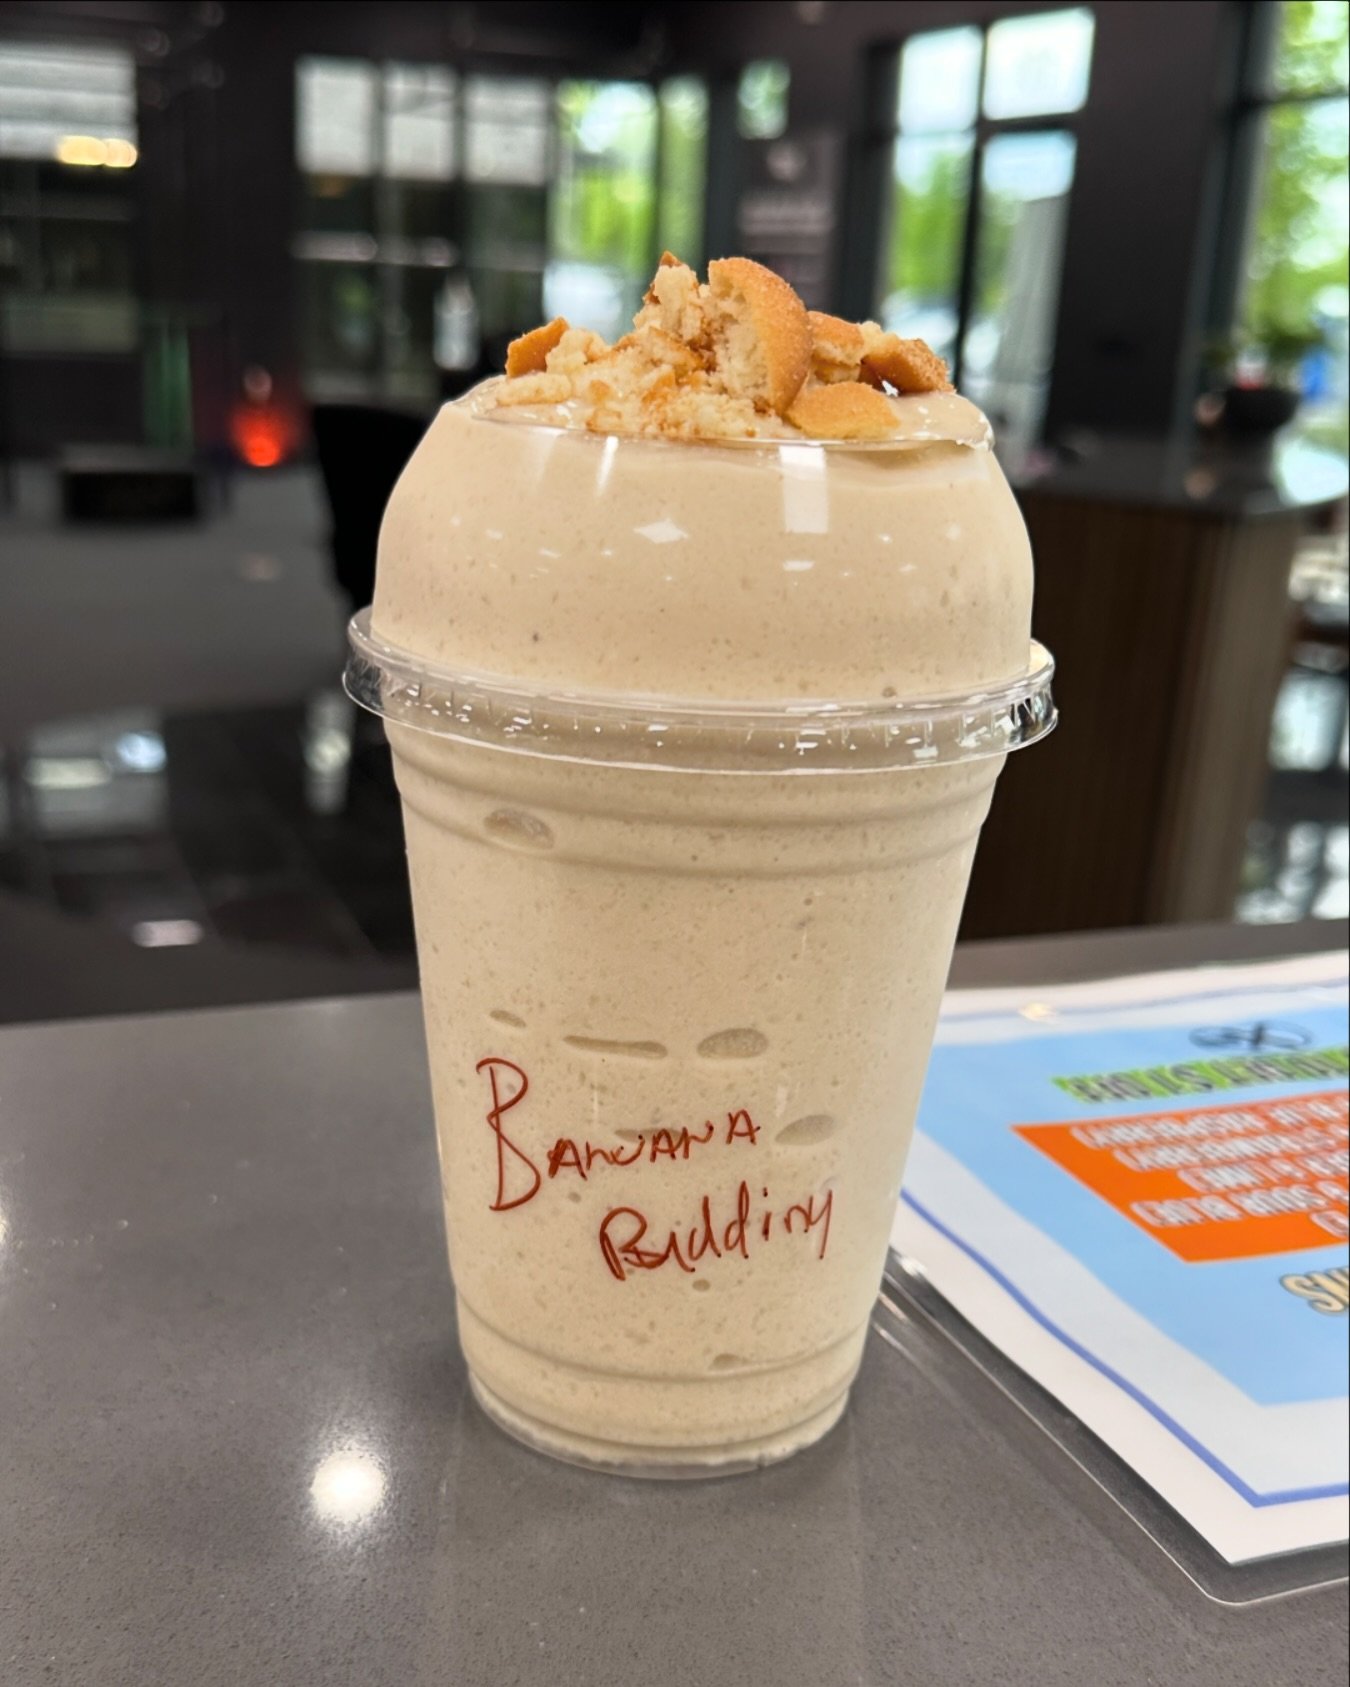 You have to have one of these! 😱

Banana Pudding Healthy Shakes 😋

⭐️24g of Protein 
⭐️13g of Carbs
⭐️Only 10g of Natural Sugar 😋
⭐️ a low 200 Calories 

We guarantee you haven&rsquo;t had a shake like this! Come see for yourself! 

📍3275 N Point